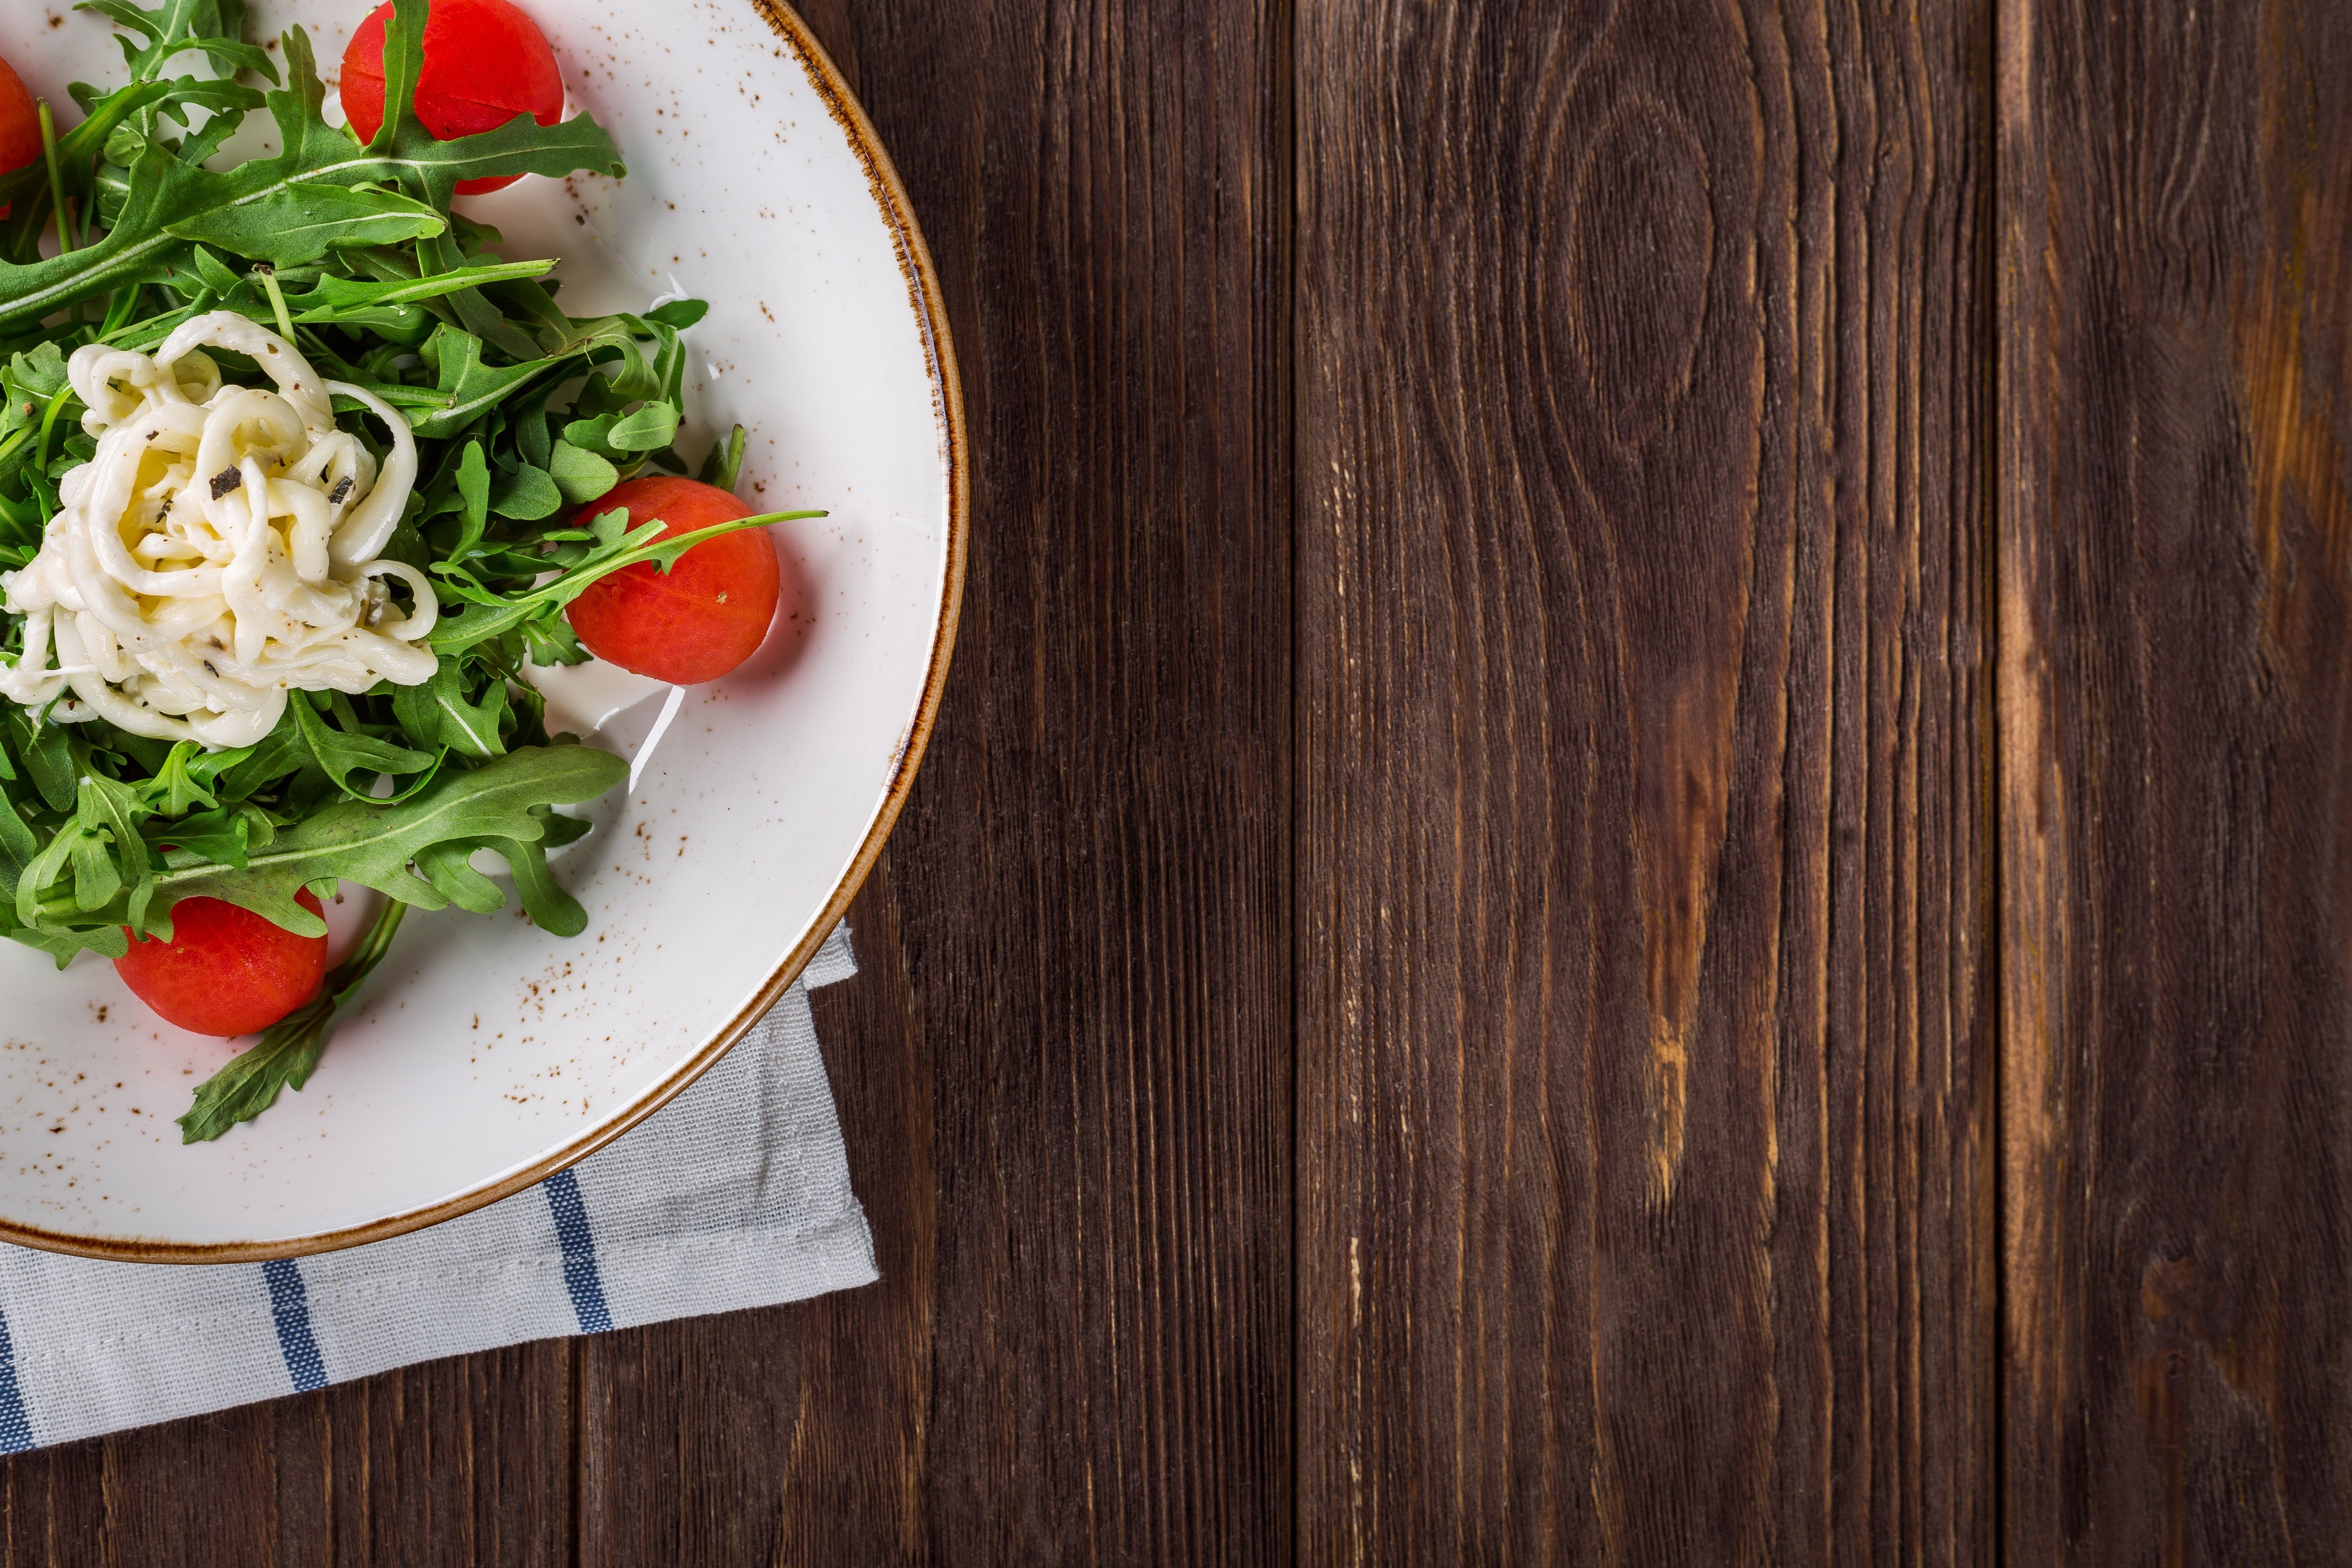 A white plate with a salad of tomatoes, onions, and greens on a wooden table. - Food, foodie